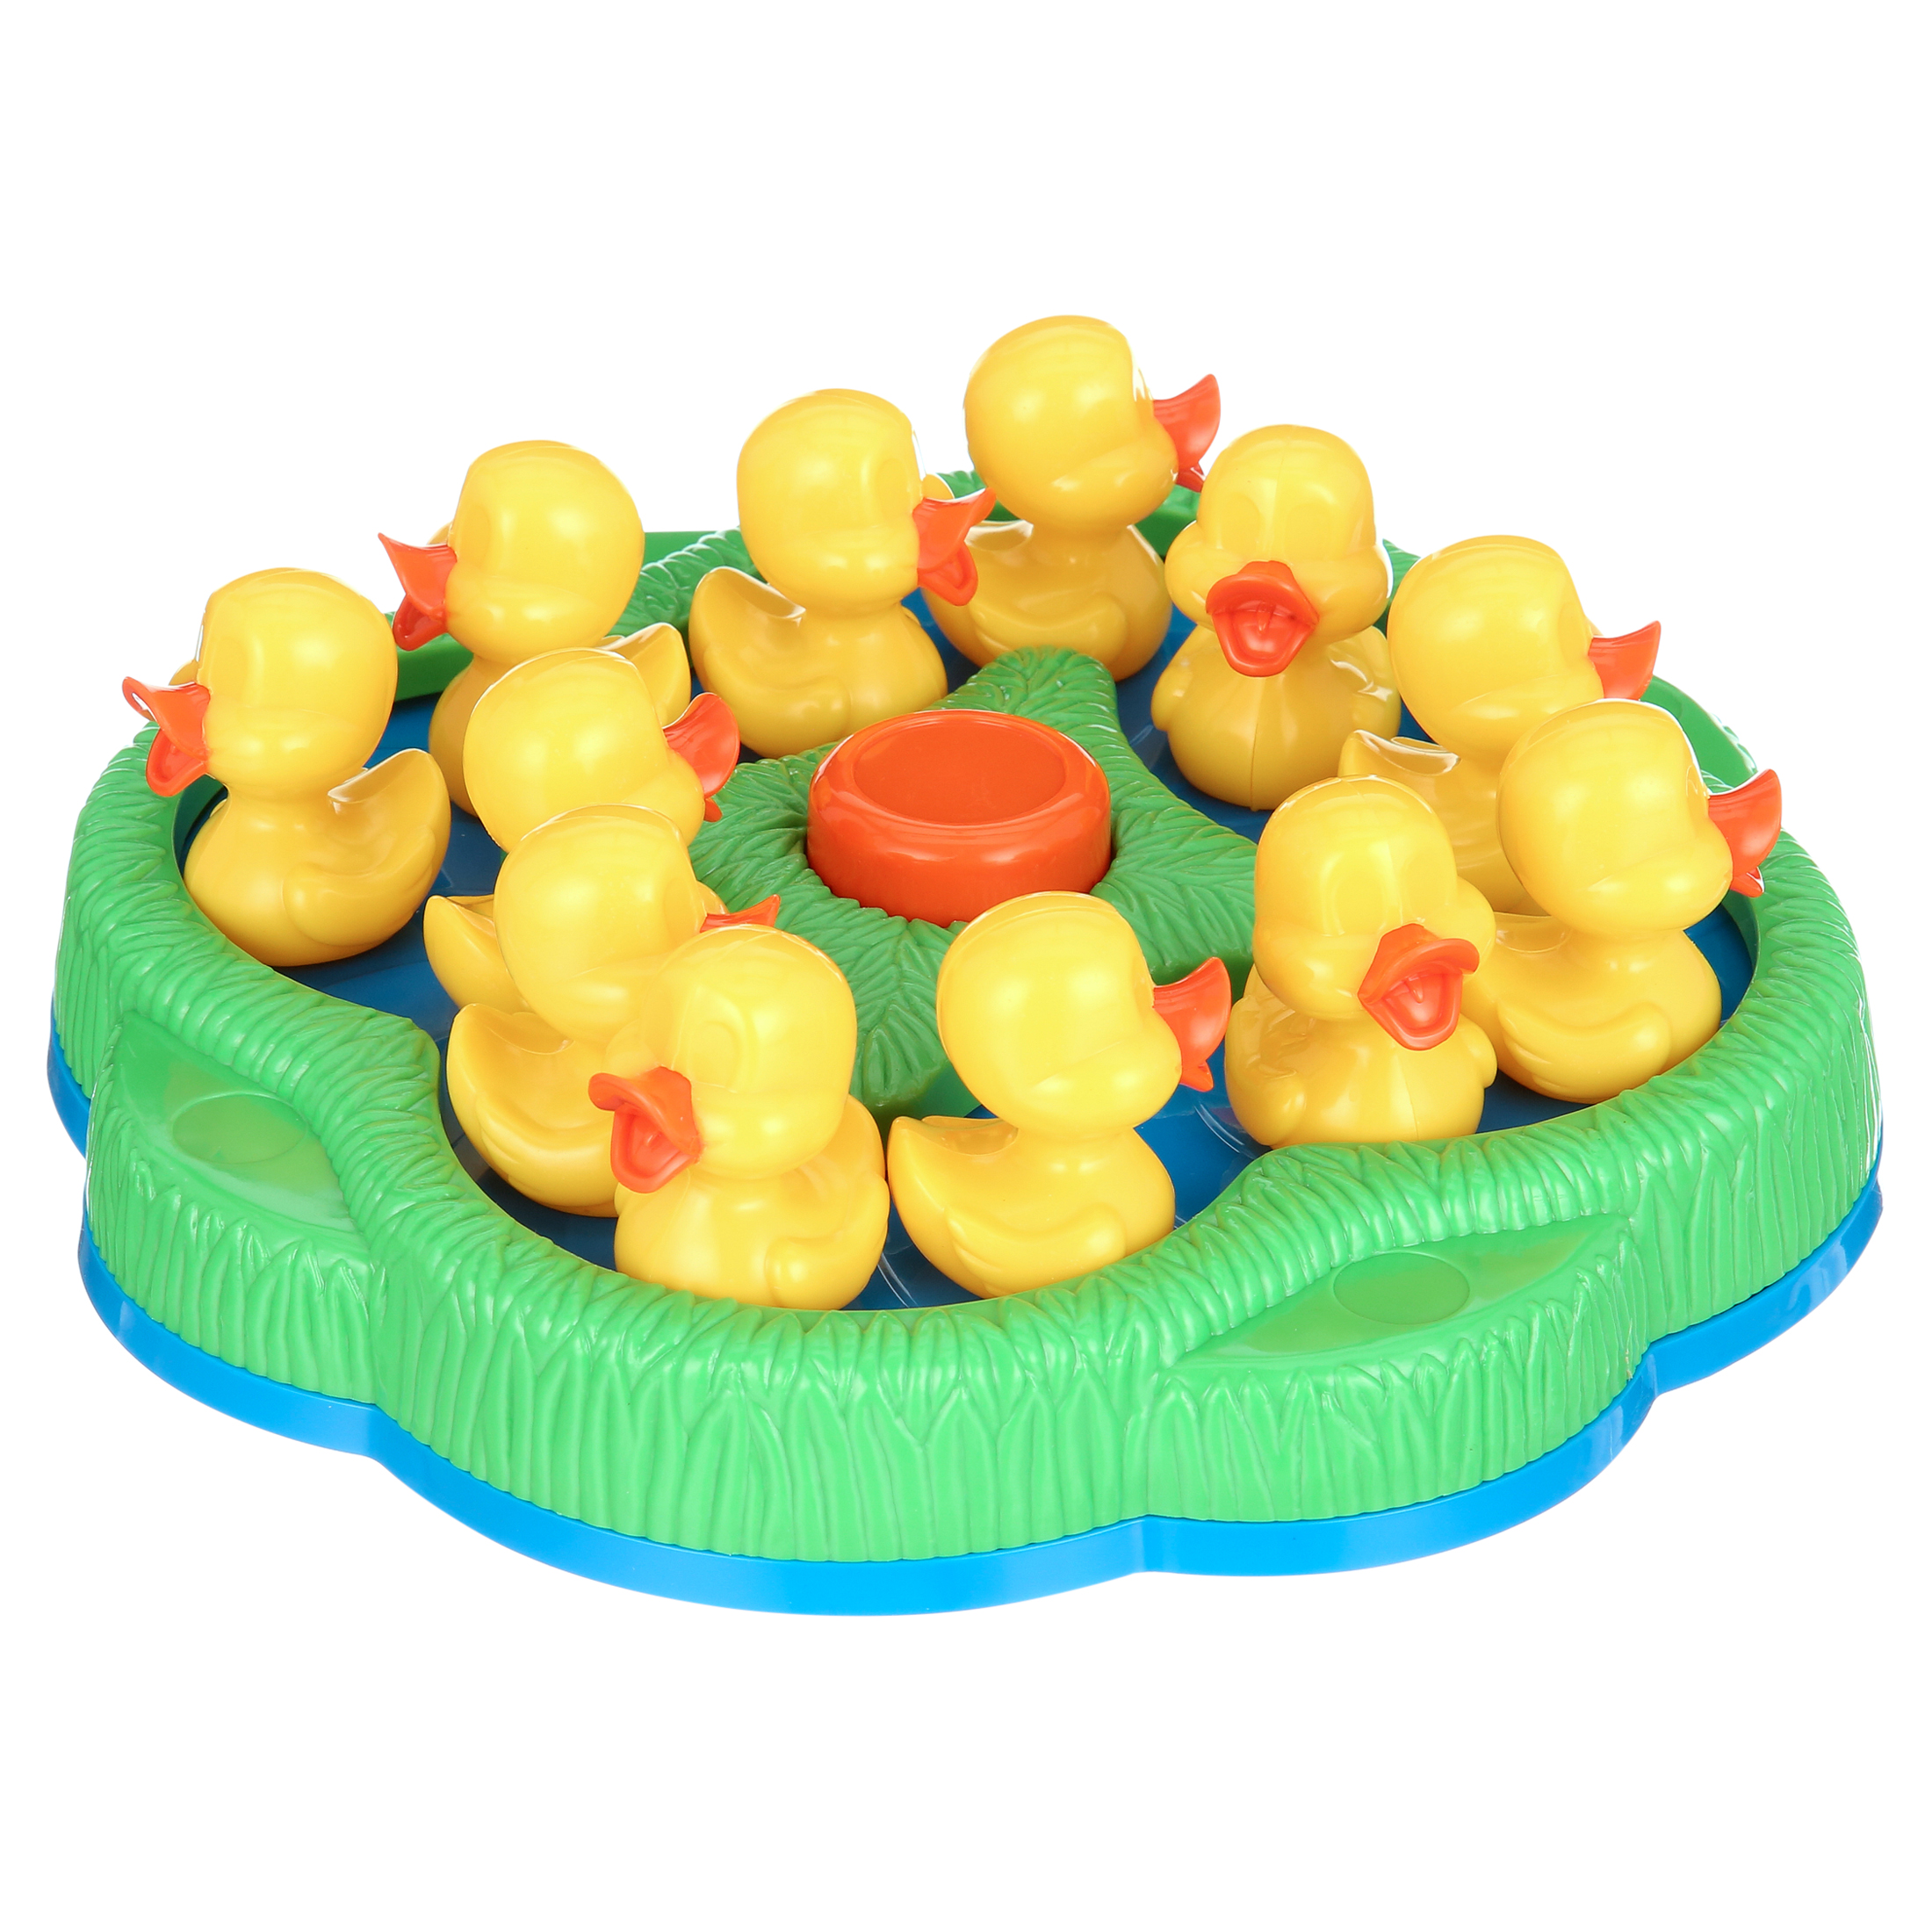 Pressman Toy Lucky Ducks Game for Kids Ages 3 and up - image 1 of 7